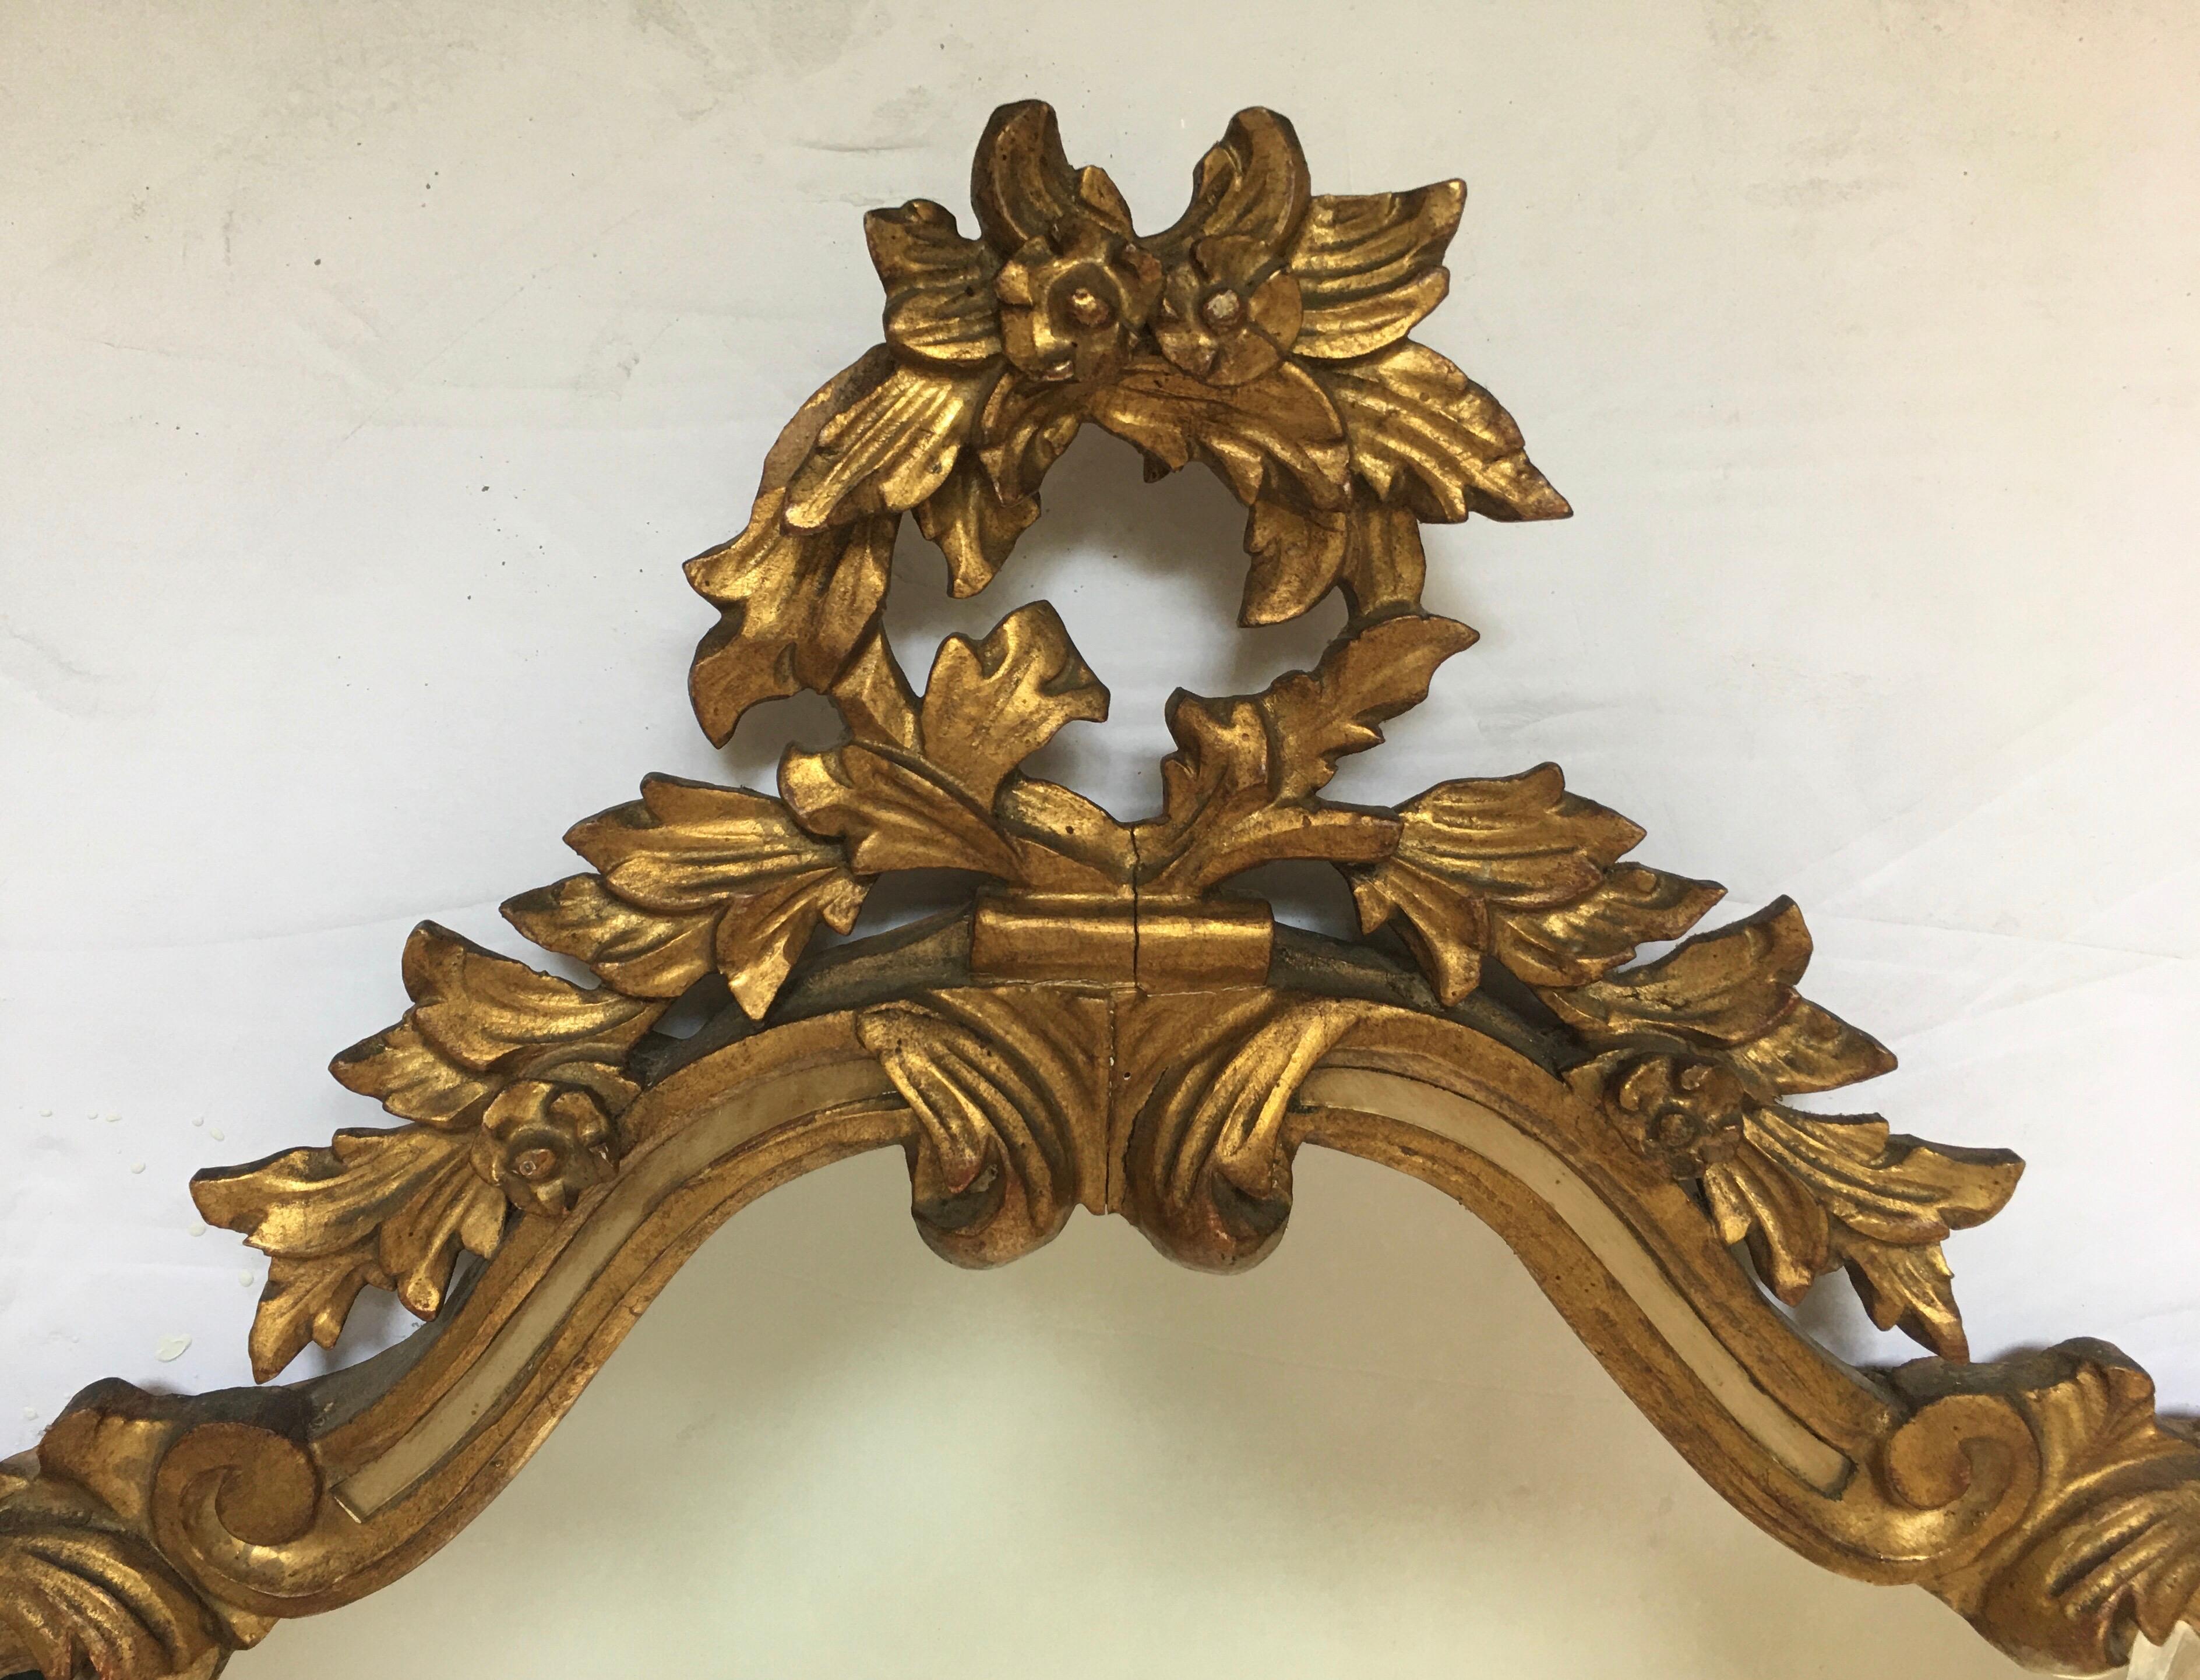 Italian Rococo style carved giltwood wall mirror with floral and acanthus leaf details. This Hollywood Regency style mirror is trimmed in aged mirror. Paper label 'Made In Italy' and branded to Verso 'Made in Italy'.